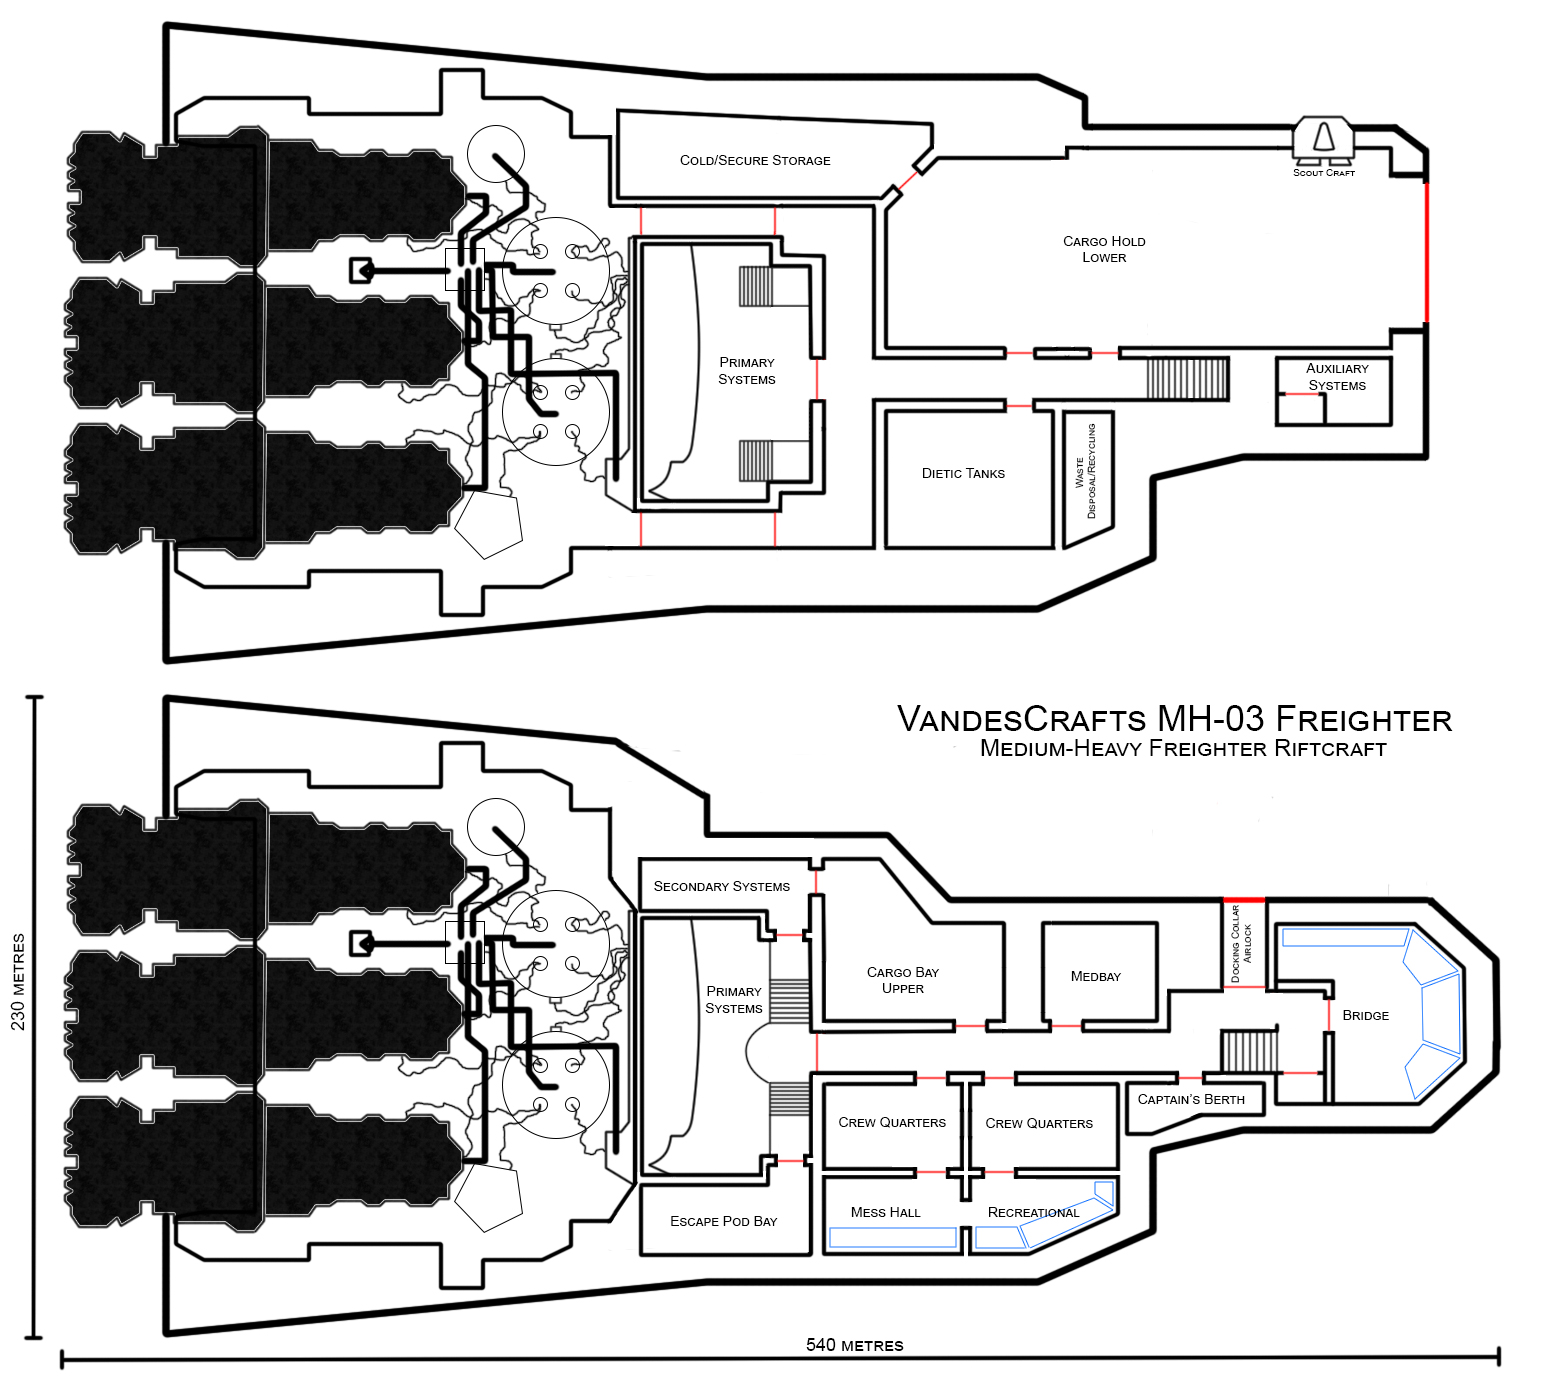 Deck plans for the VandesCrafts MH-03 Freighter spacecraft.